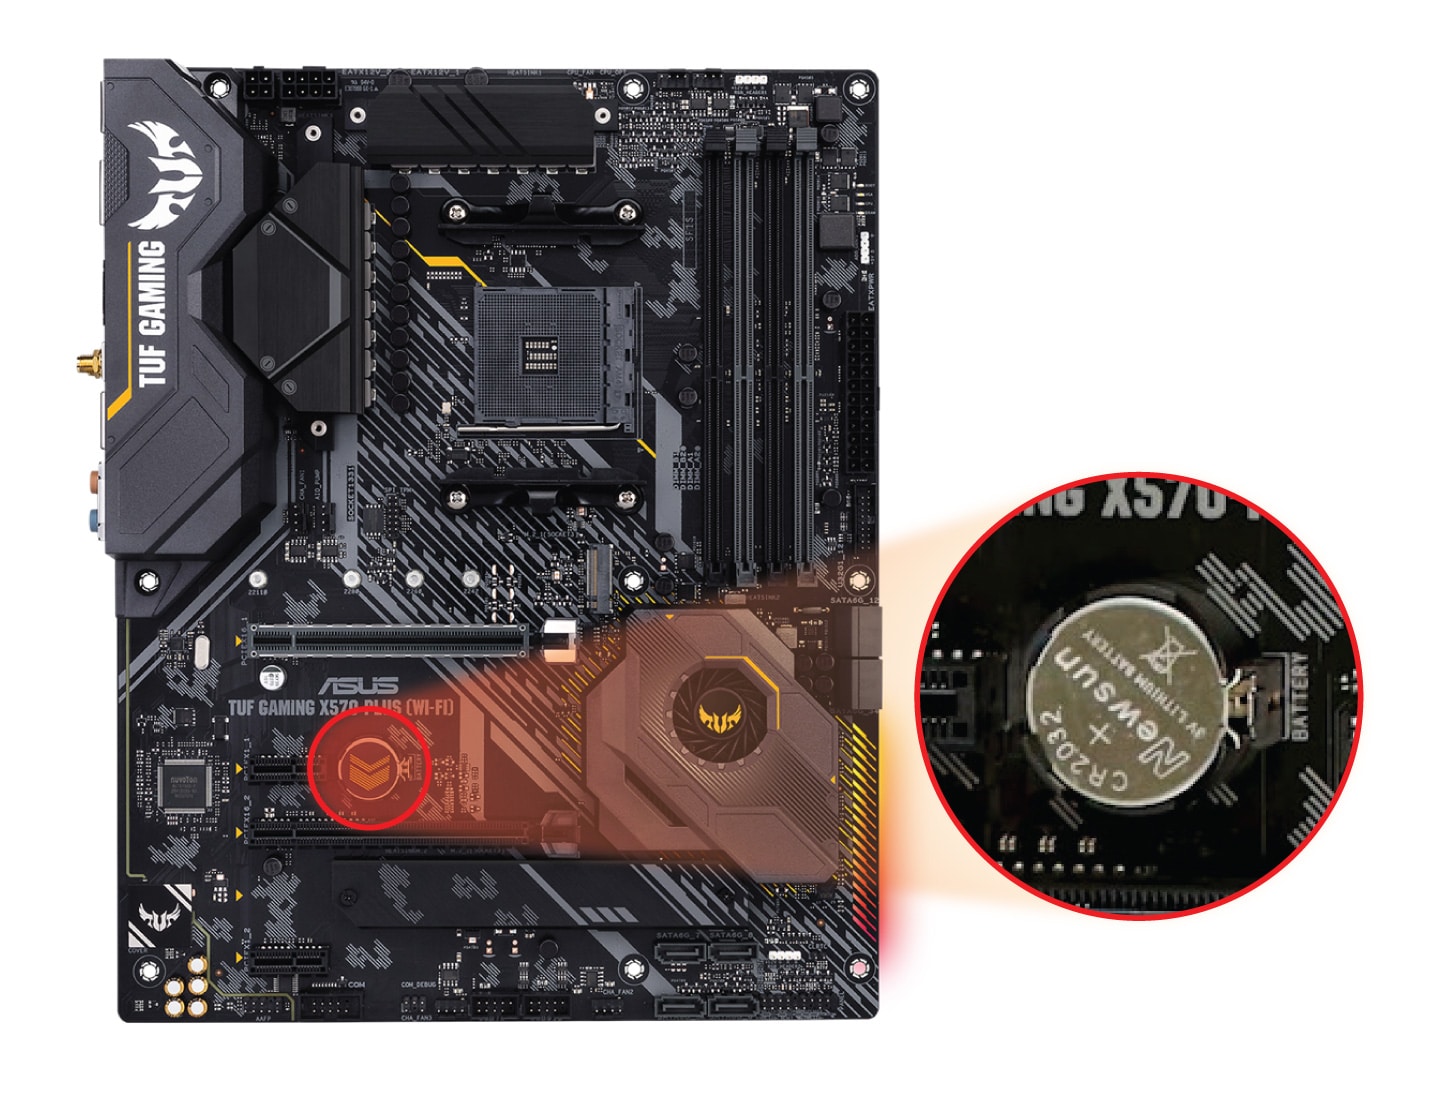 How to clear CMOS on ASUS TUF GAMING X570-PLUS (WI-FI) Motherboard: 2 Methods